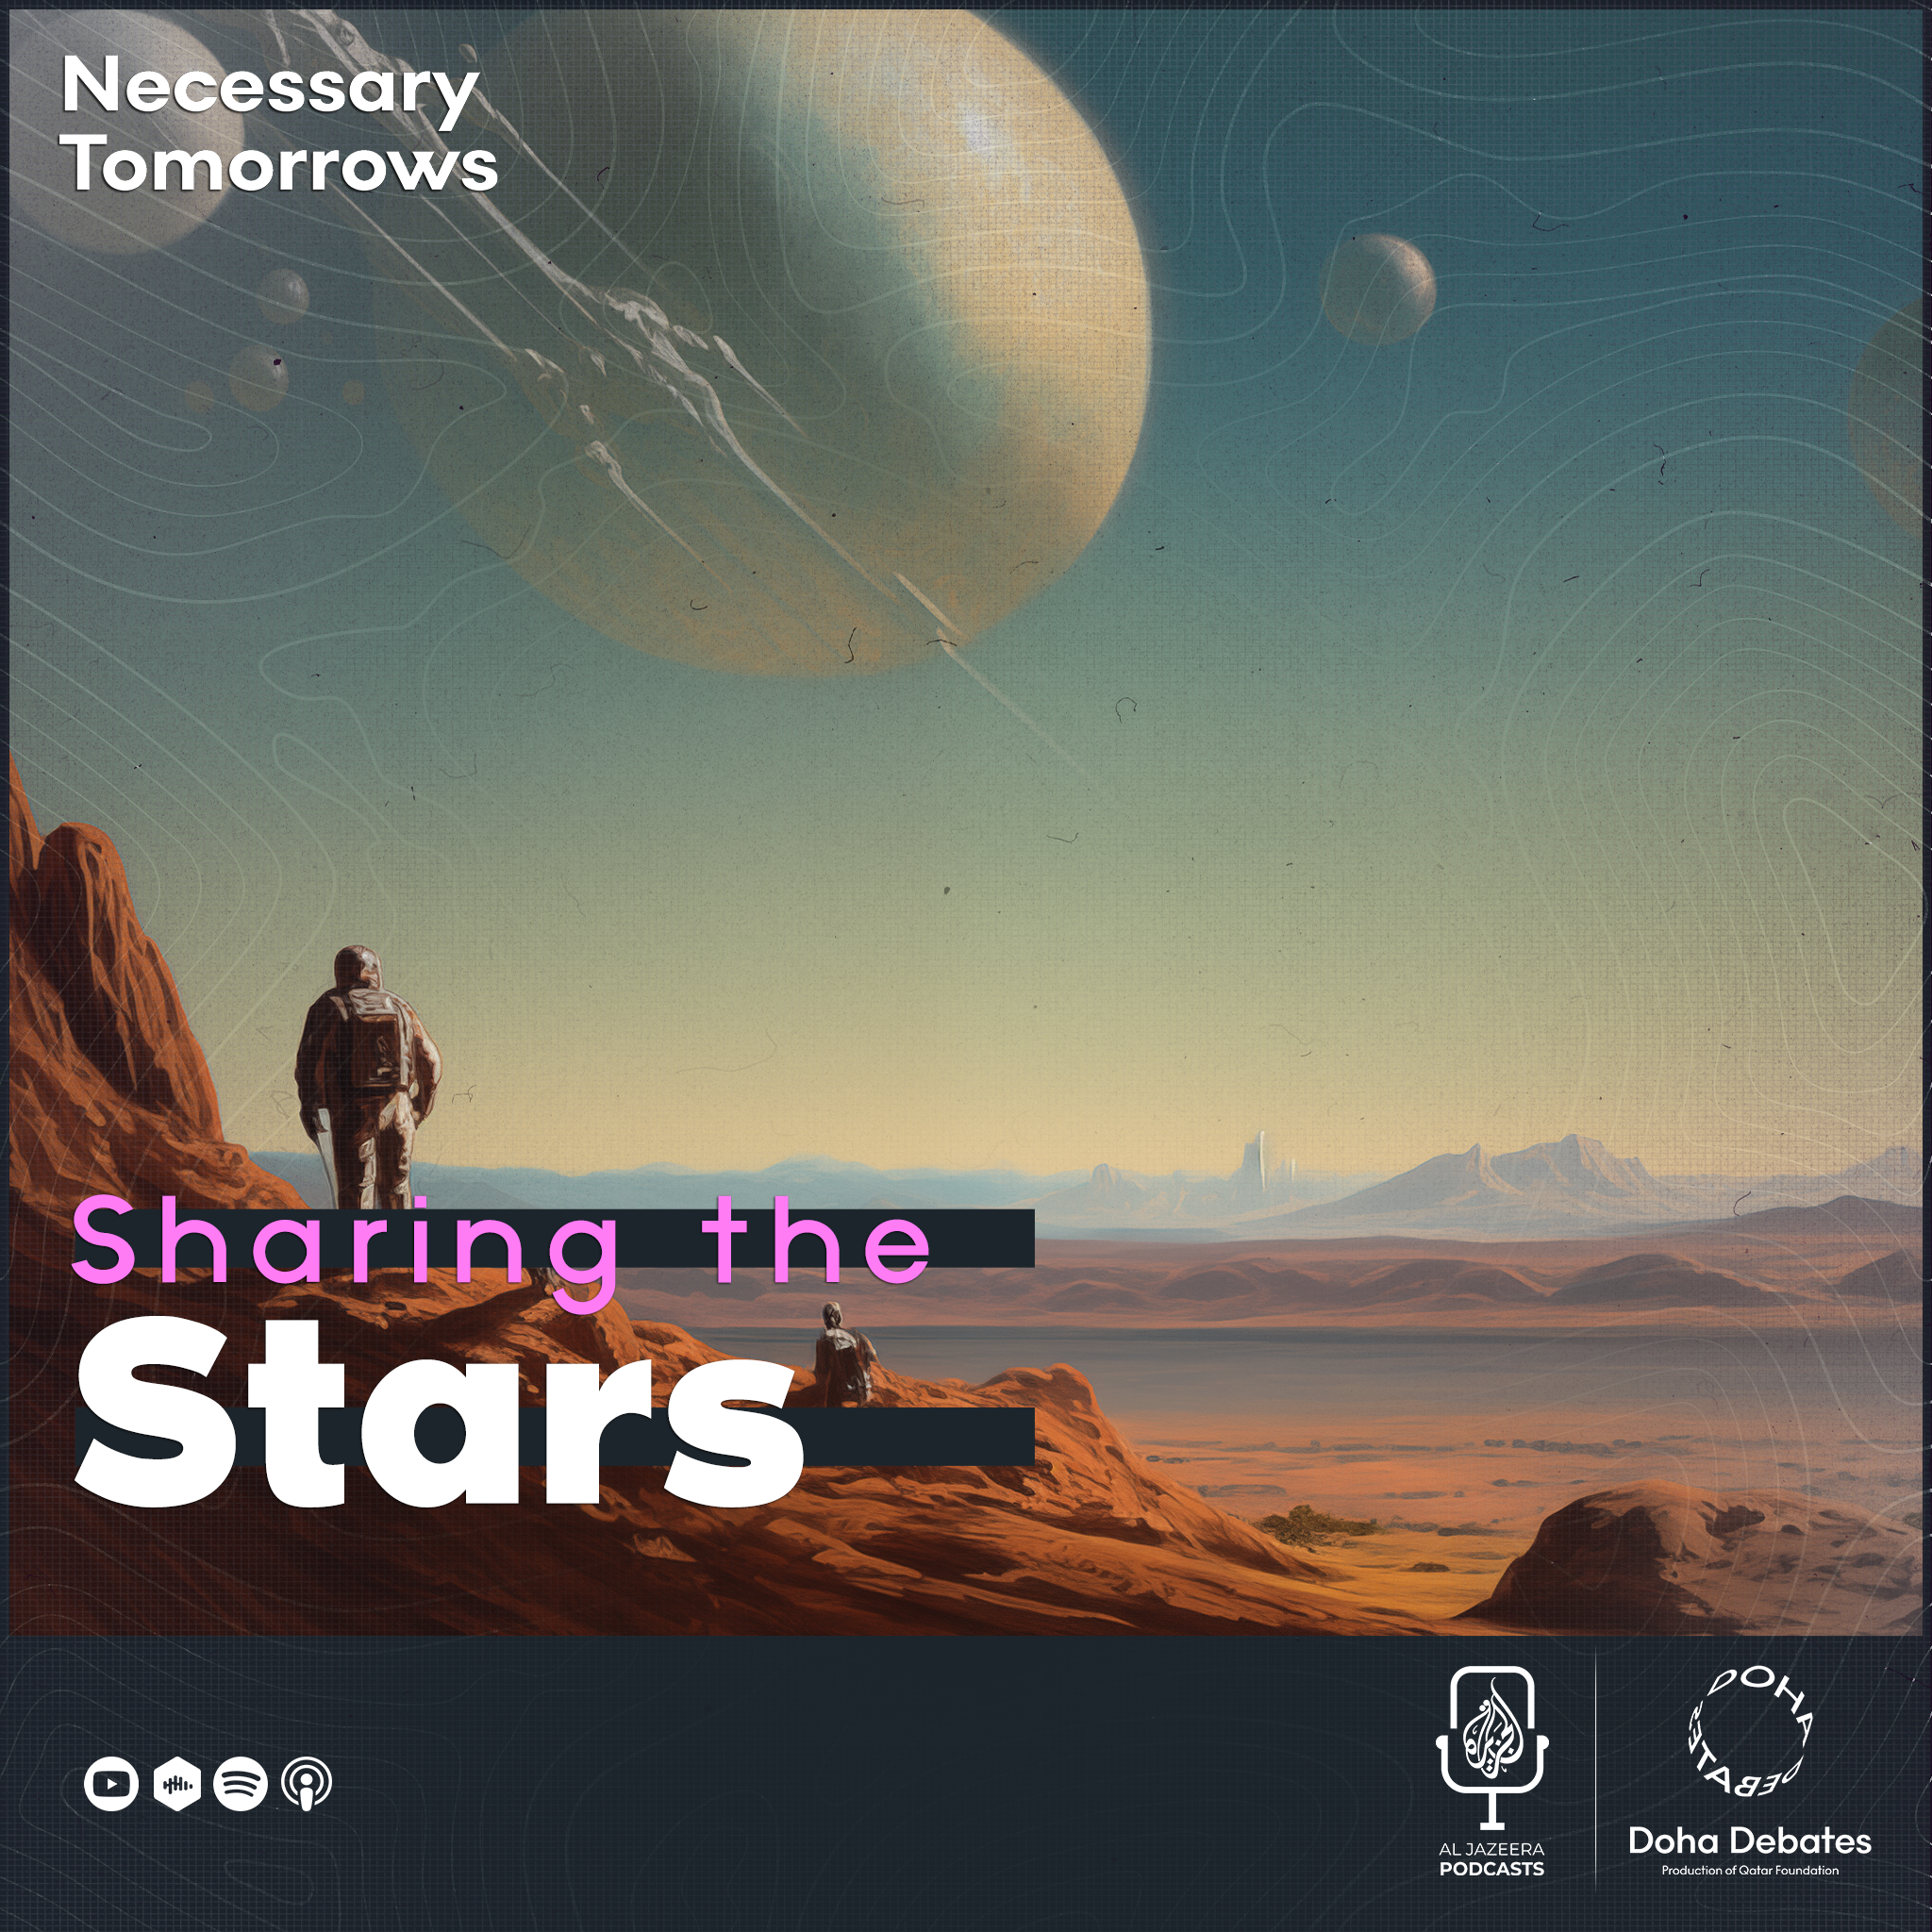 Episode 4: Sharing the Stars